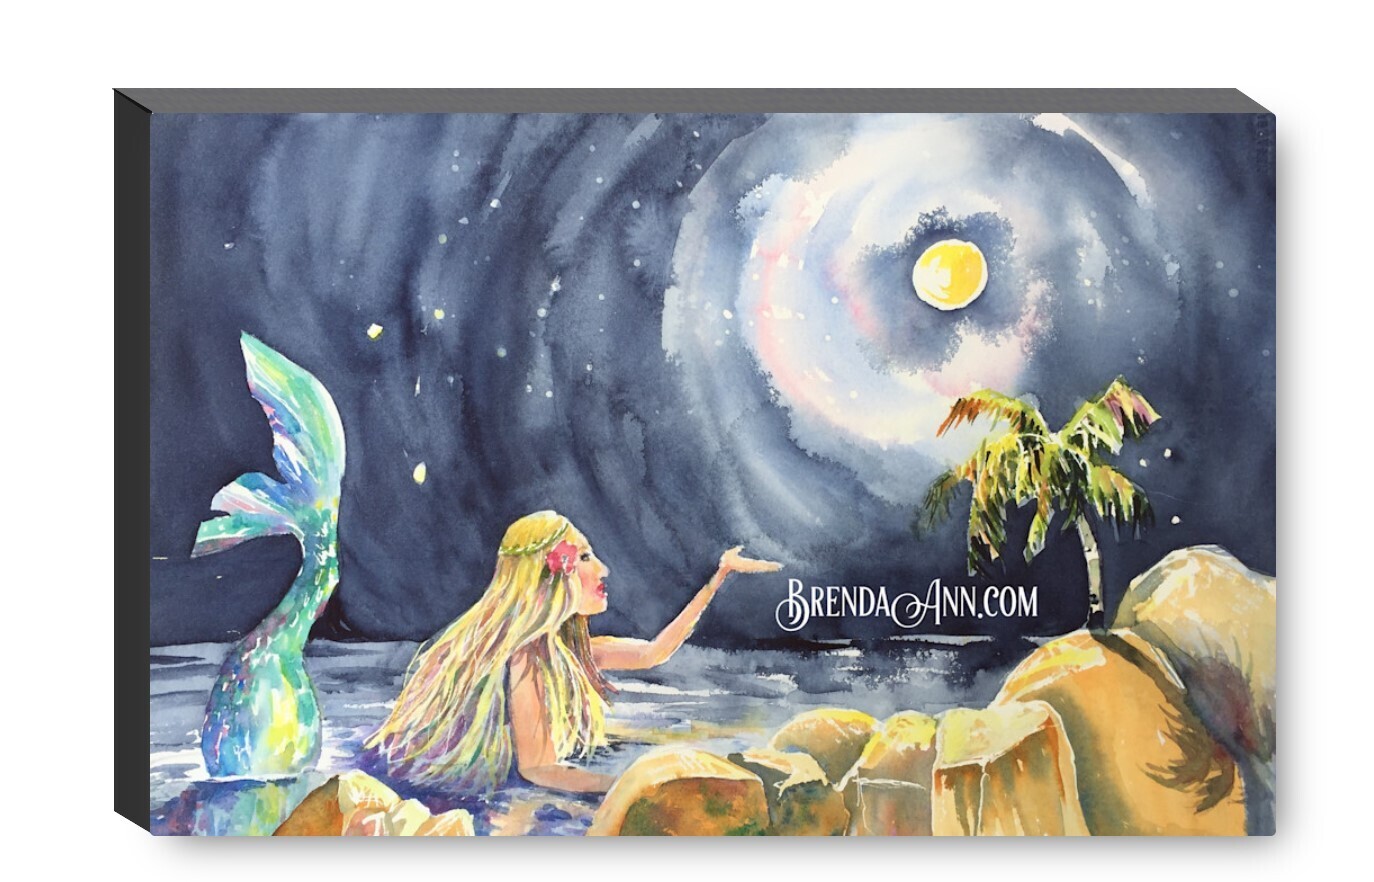 Moonglow Mermaid Canvas Gallery Wrapped Print - Watercolor Art - Ready to hang on a wall